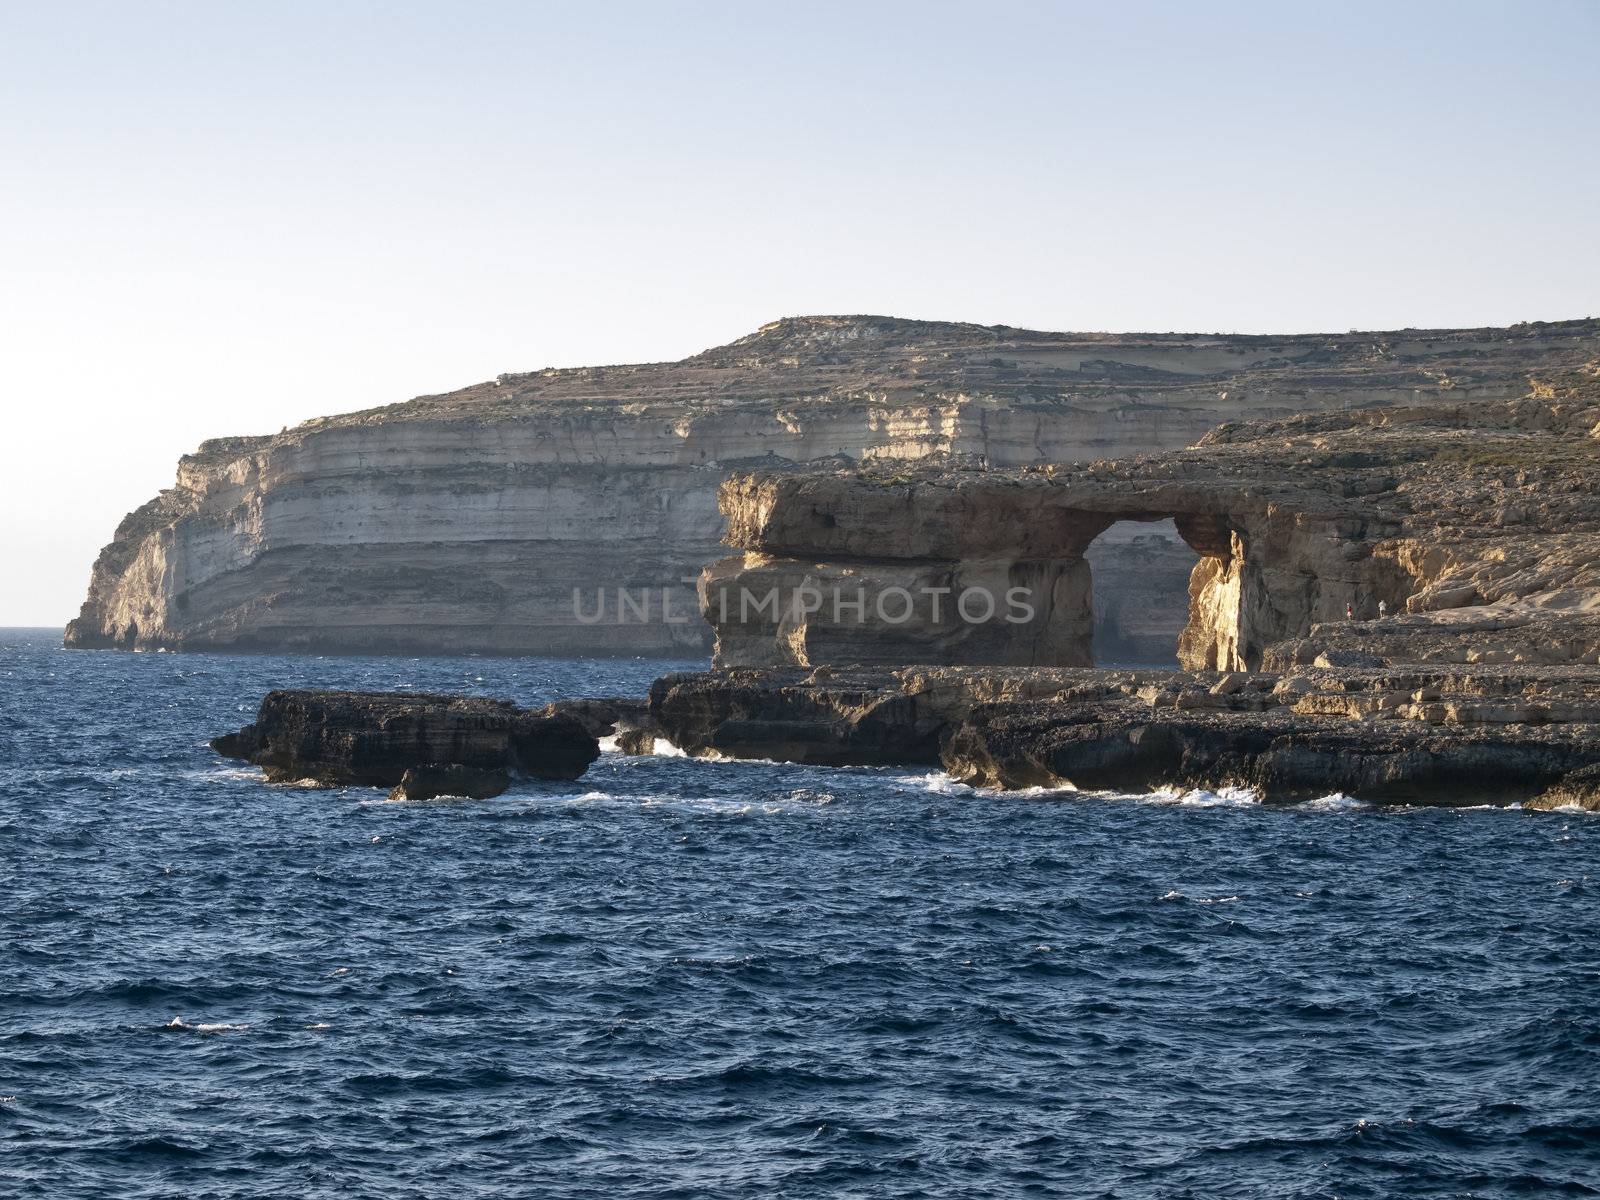 A seascape from Dwejra in Gozo showing the Azure Window and coast